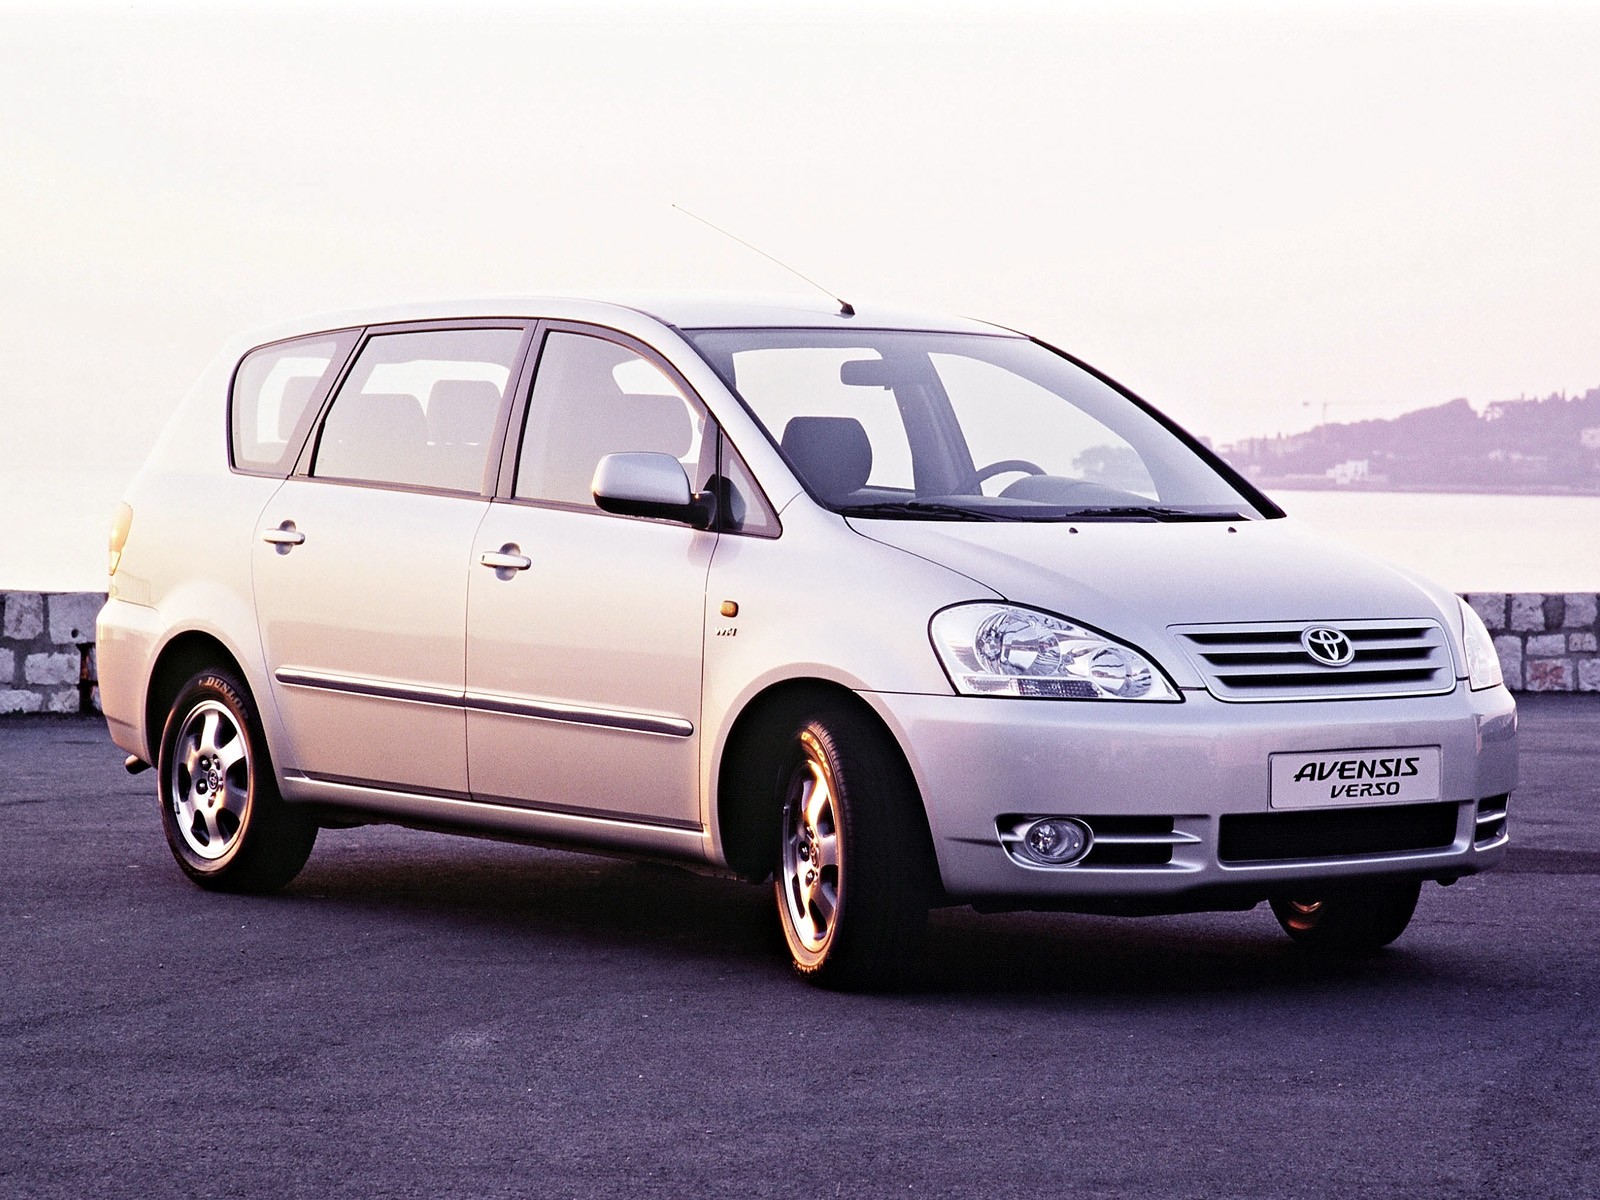 toyota avensis verso 2003 specifications #4